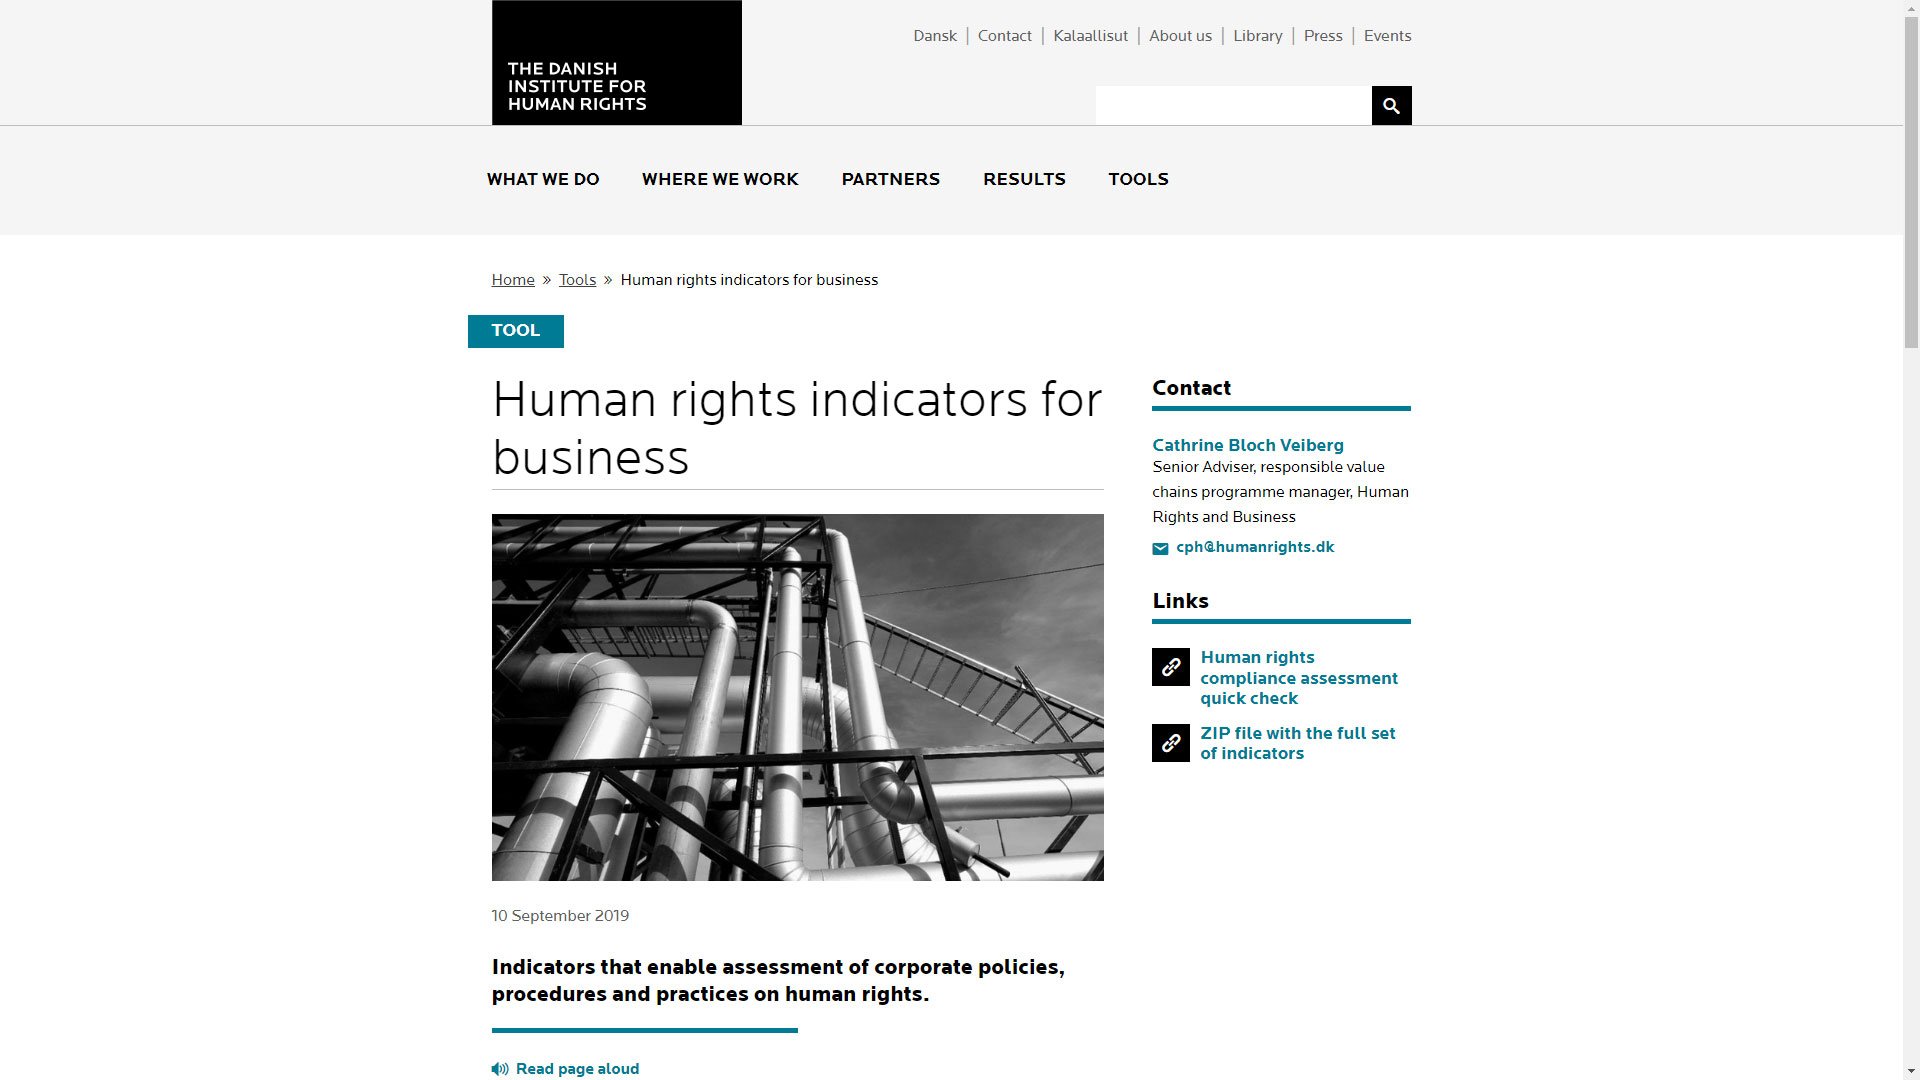 The Danish Institute for Human Rights